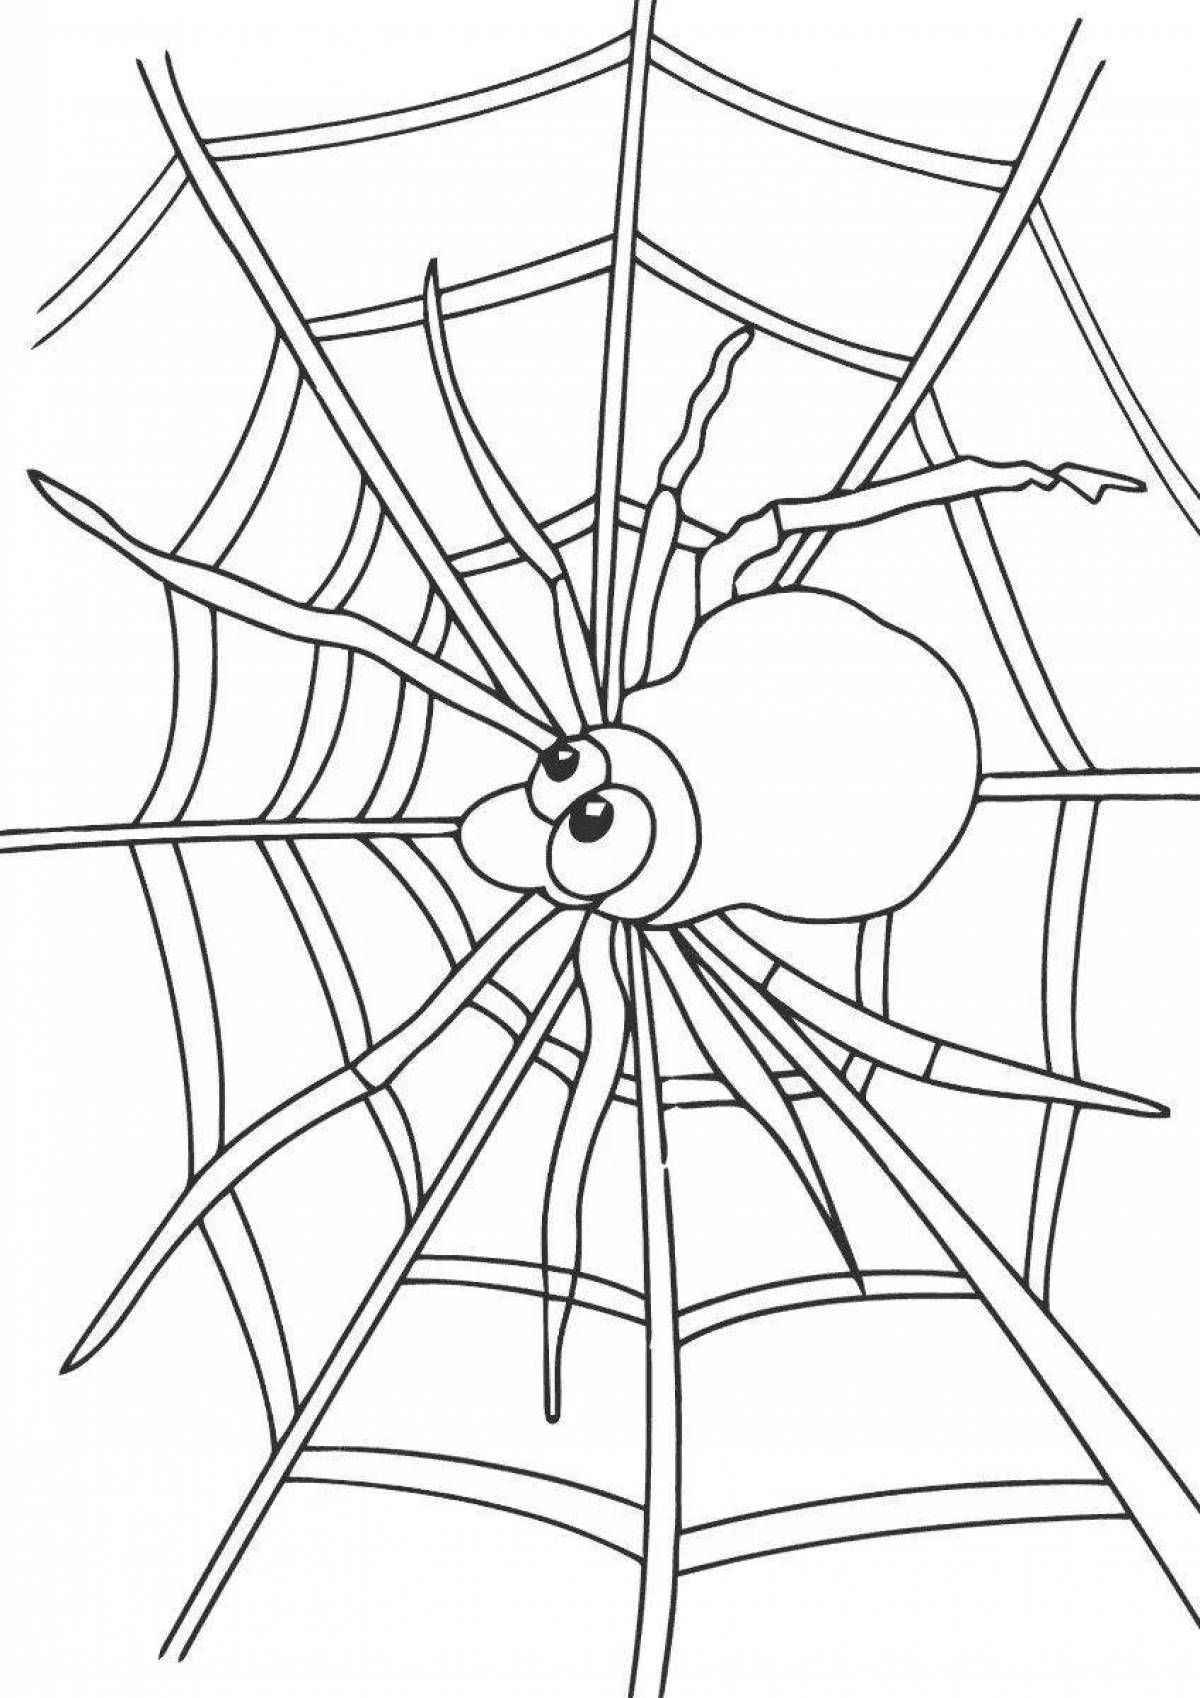 Colorful web coloring book for kids